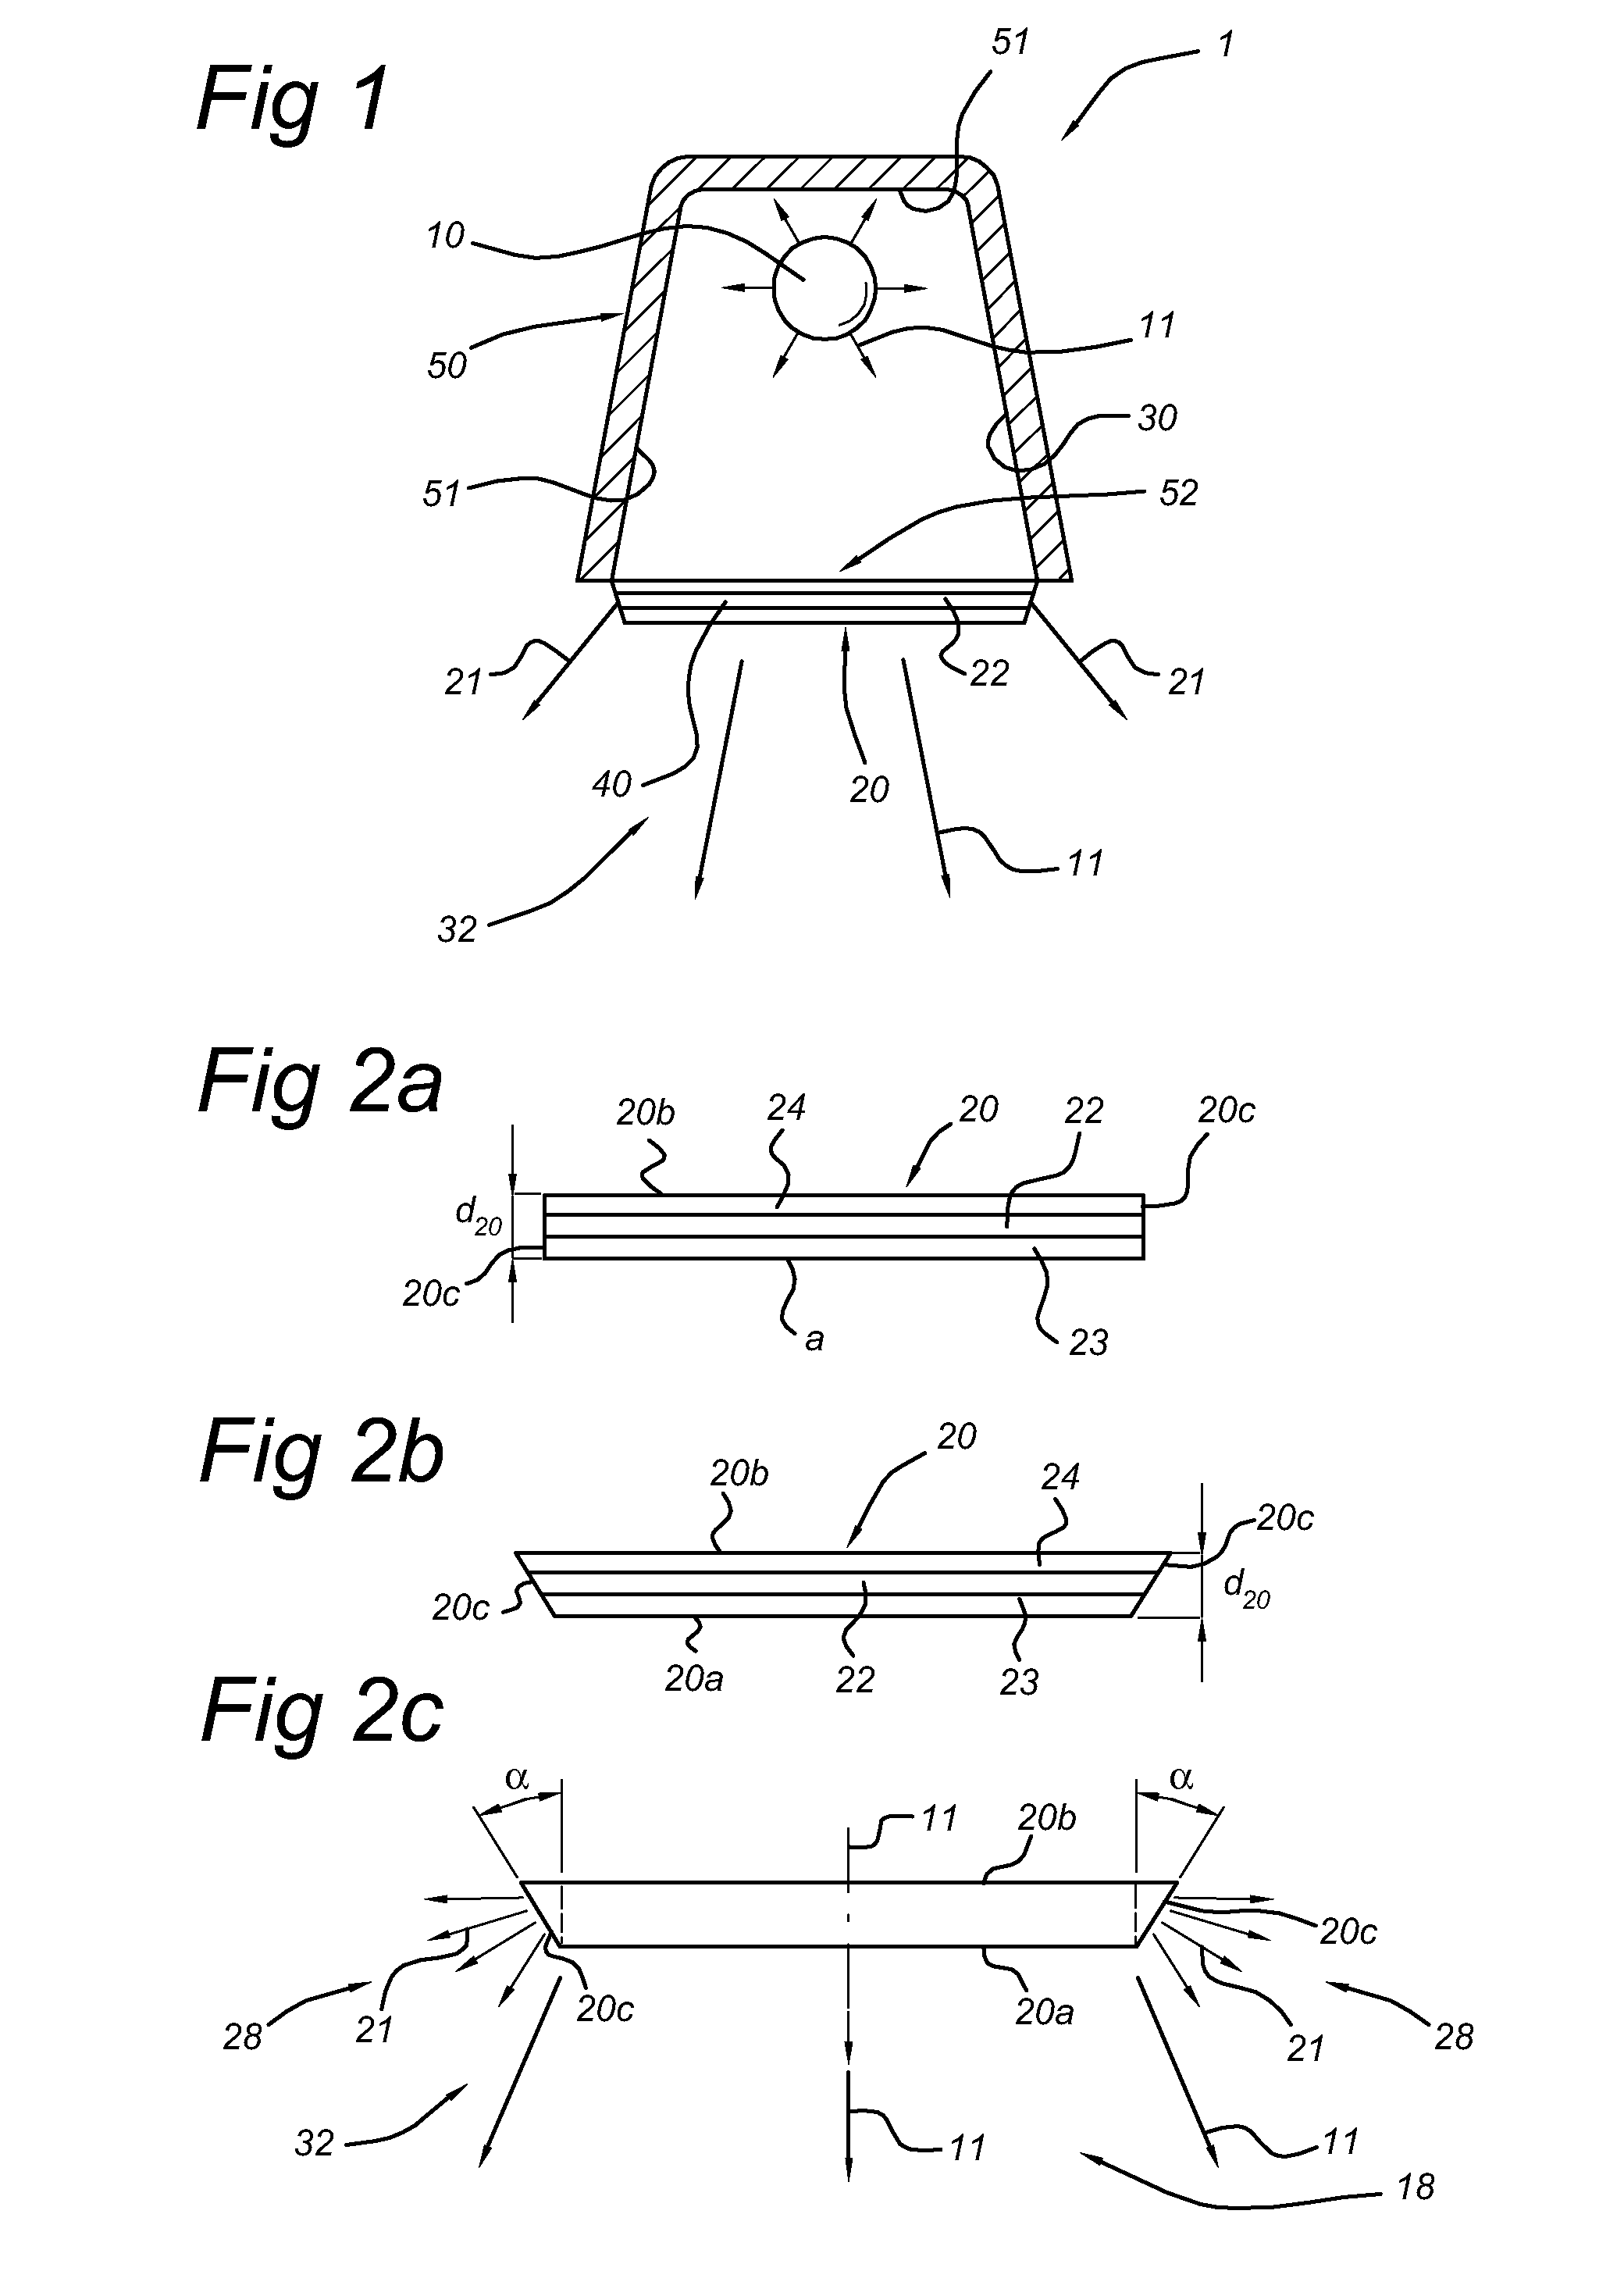 Lighting device comprising at least one lamp and at least one OLED